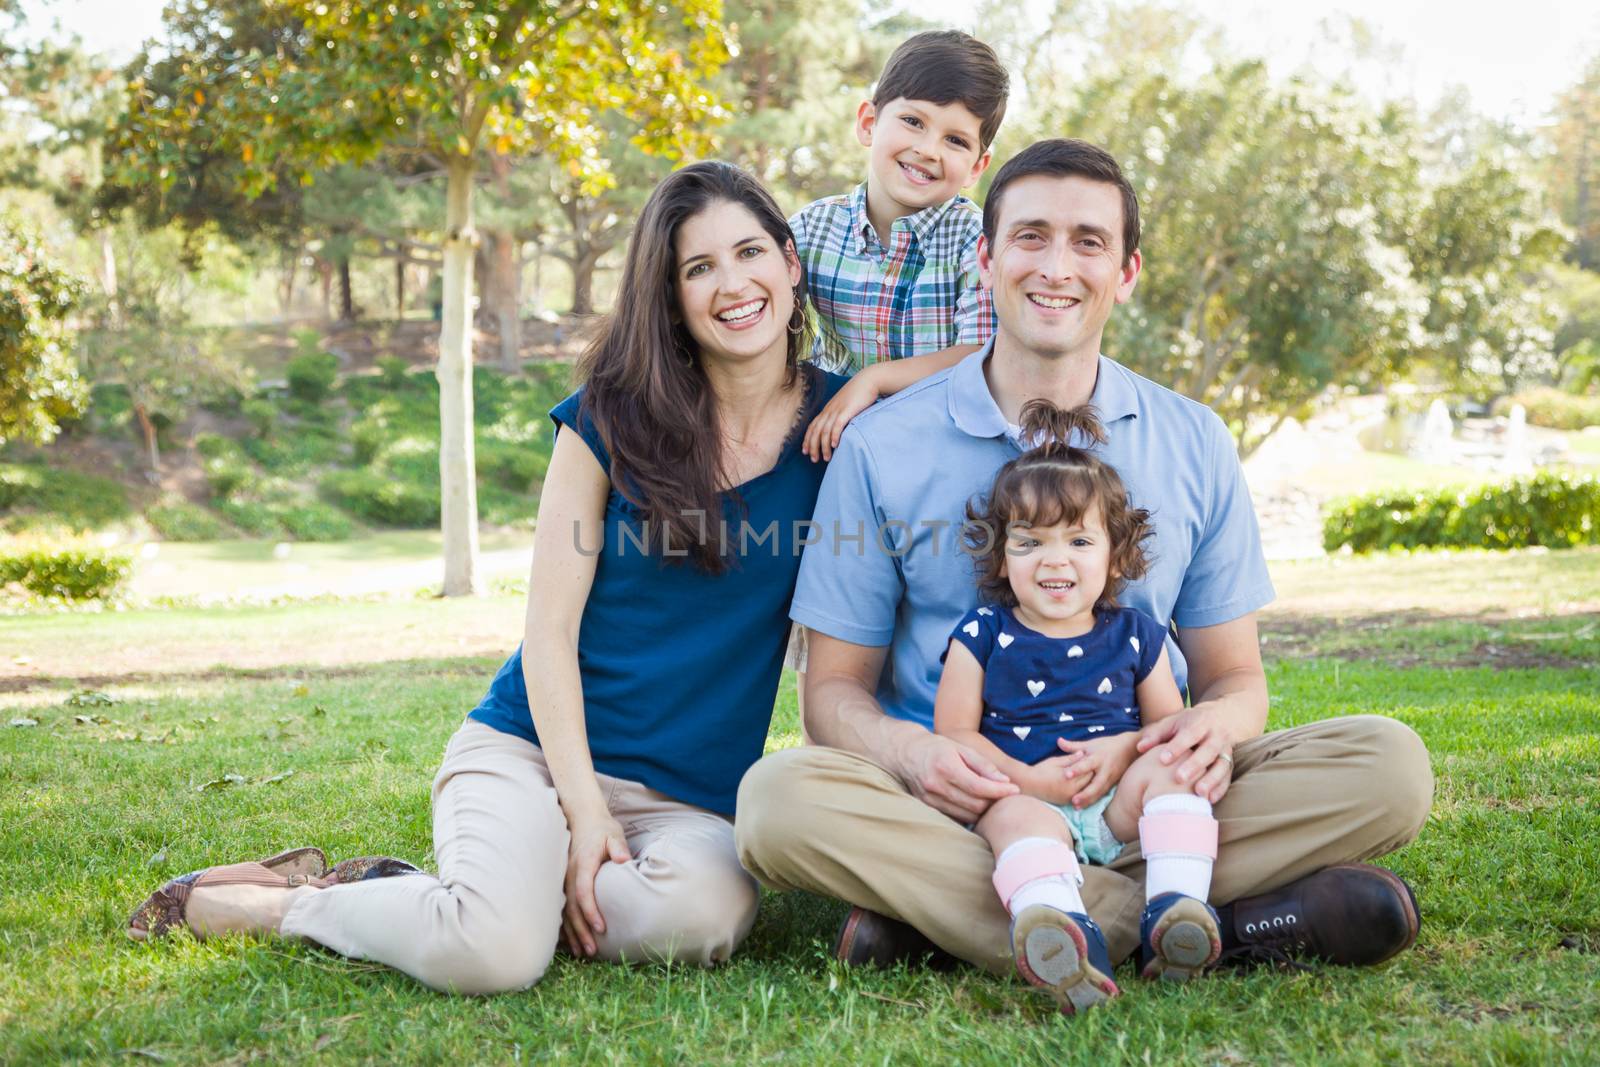 Attractive Young Mixed Race Family Portrait in the Park.